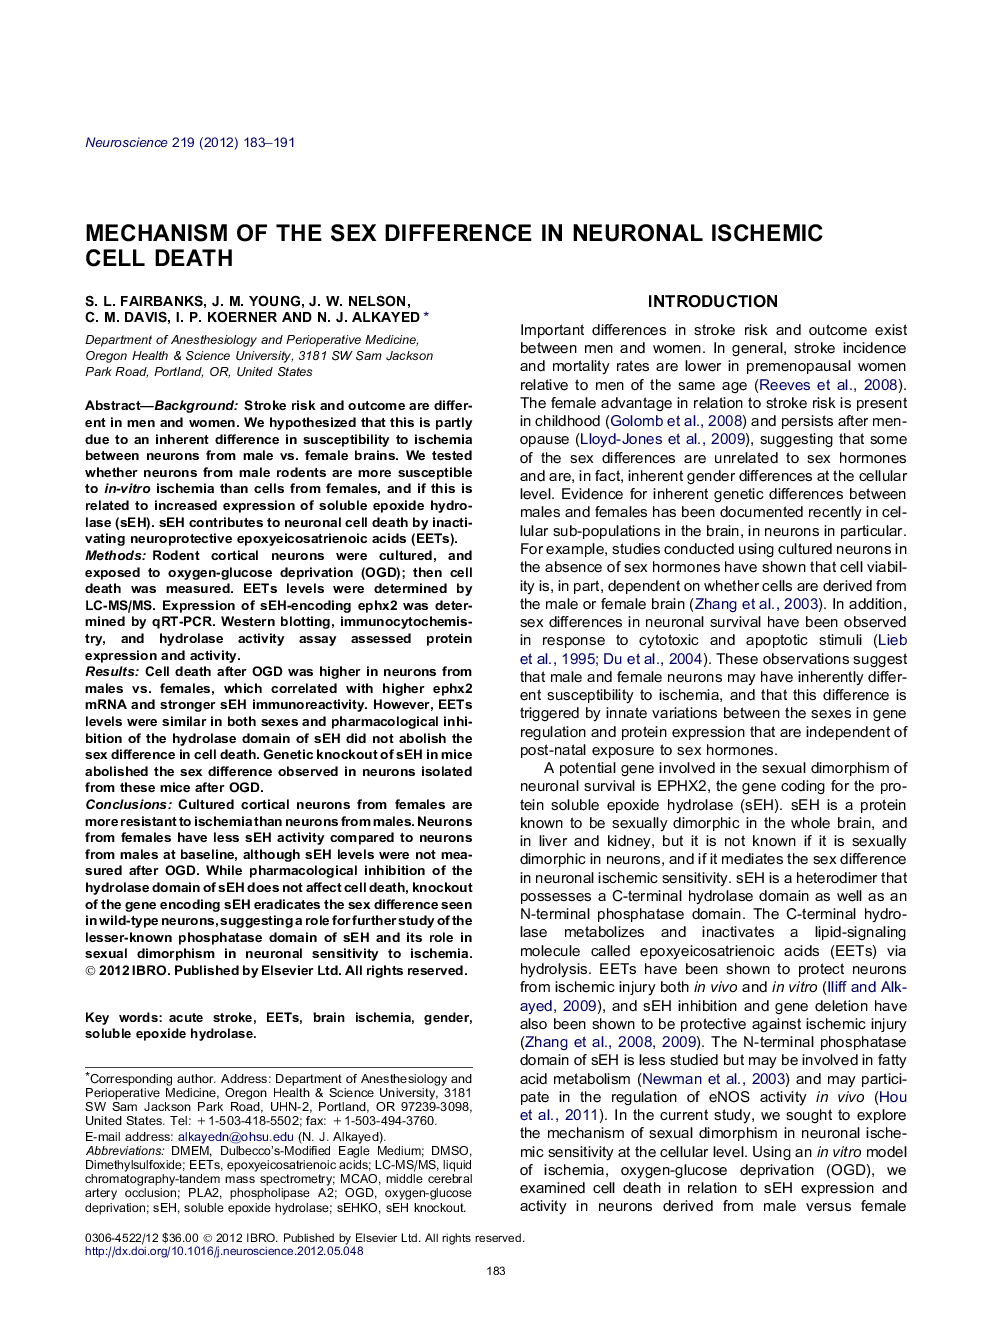 Mechanism of the sex difference in neuronal ischemic cell death